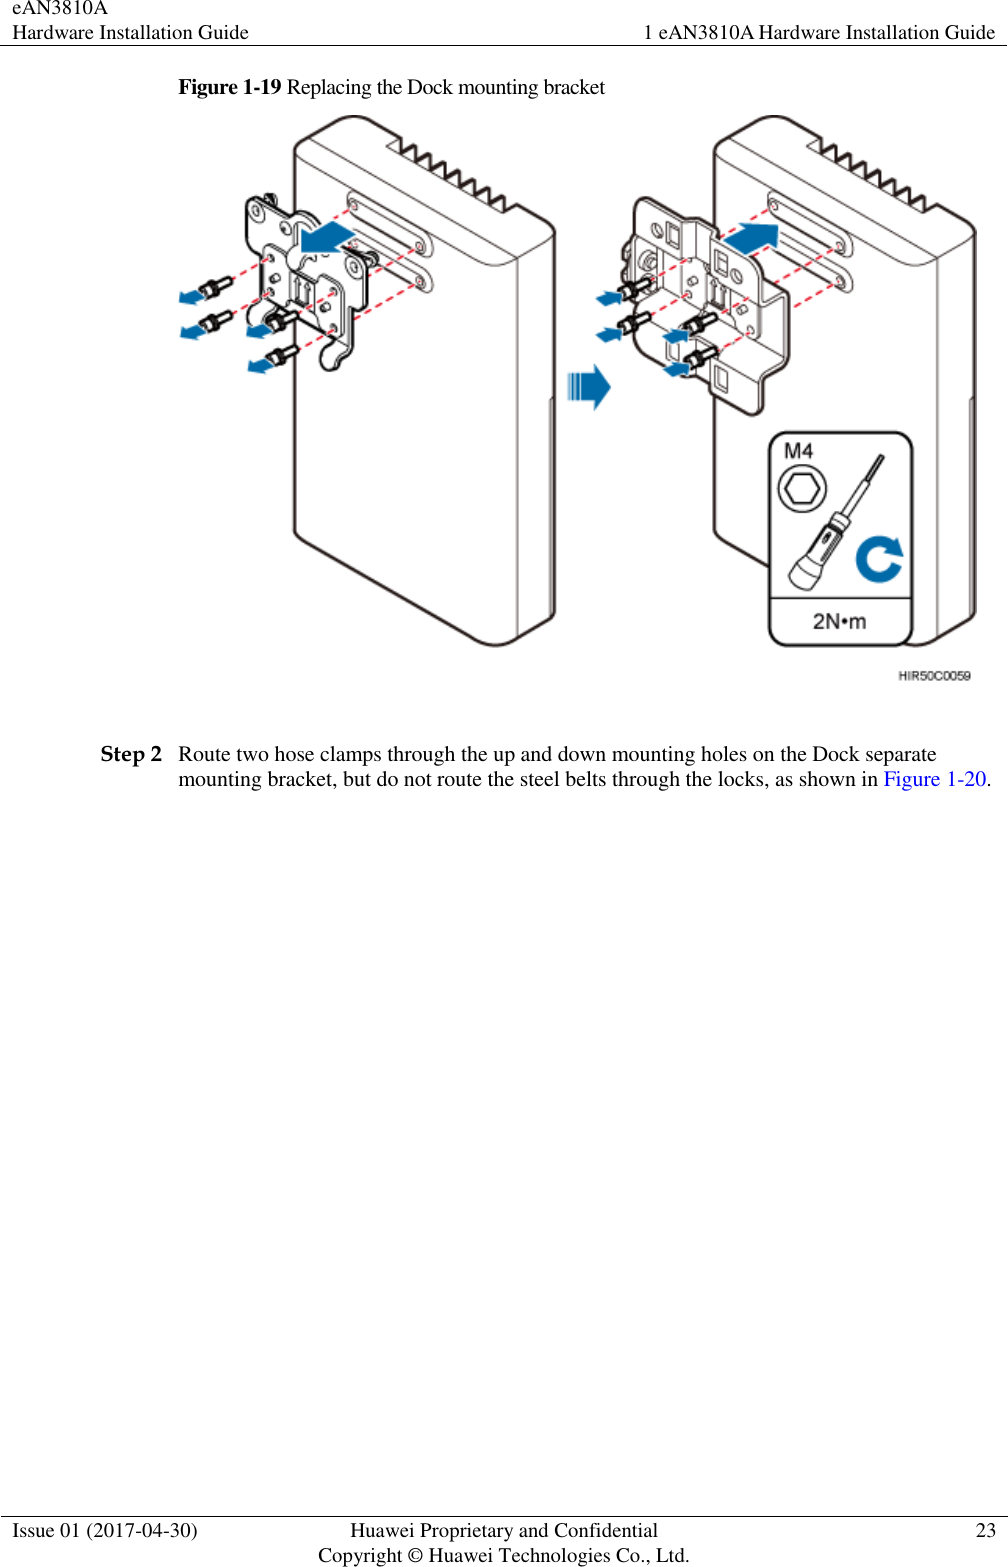 eAN3810A   Hardware Installation Guide 1 eAN3810A Hardware Installation Guide  Issue 01 (2017-04-30) Huawei Proprietary and Confidential                                     Copyright © Huawei Technologies Co., Ltd. 23  Figure 1-19 Replacing the Dock mounting bracket     Step 2 Route two hose clamps through the up and down mounting holes on the Dock separate mounting bracket, but do not route the steel belts through the locks, as shown in Figure 1-20. 